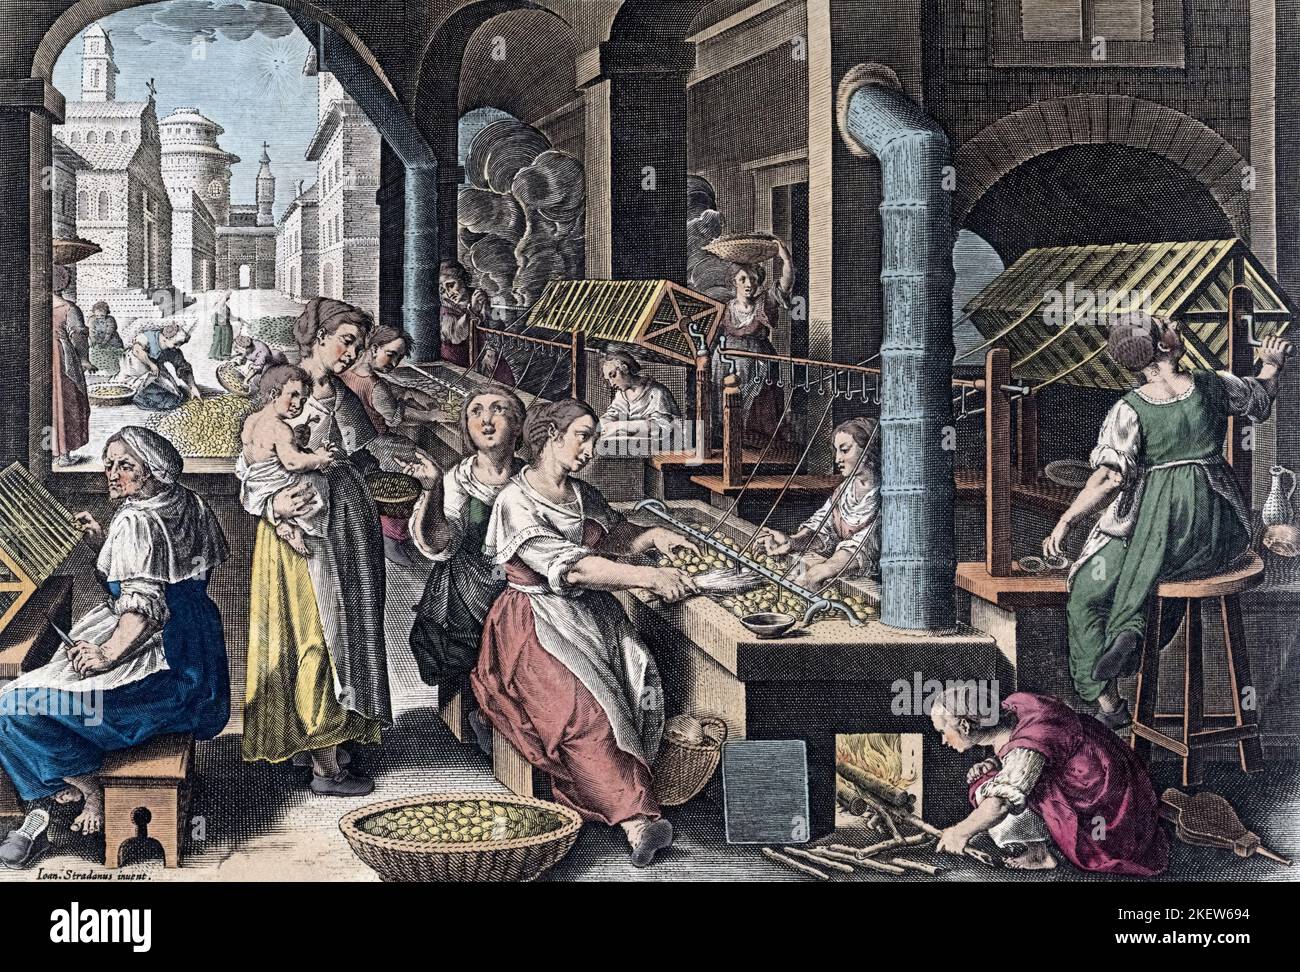 Silk production in Europe in the 16th century.  Reeling threads of silk from cocoons. From Vermis Sericus, a series of engravings by Karel van Mallery after a work by Jan van der Straet, known as Stradanus. Stock Photo